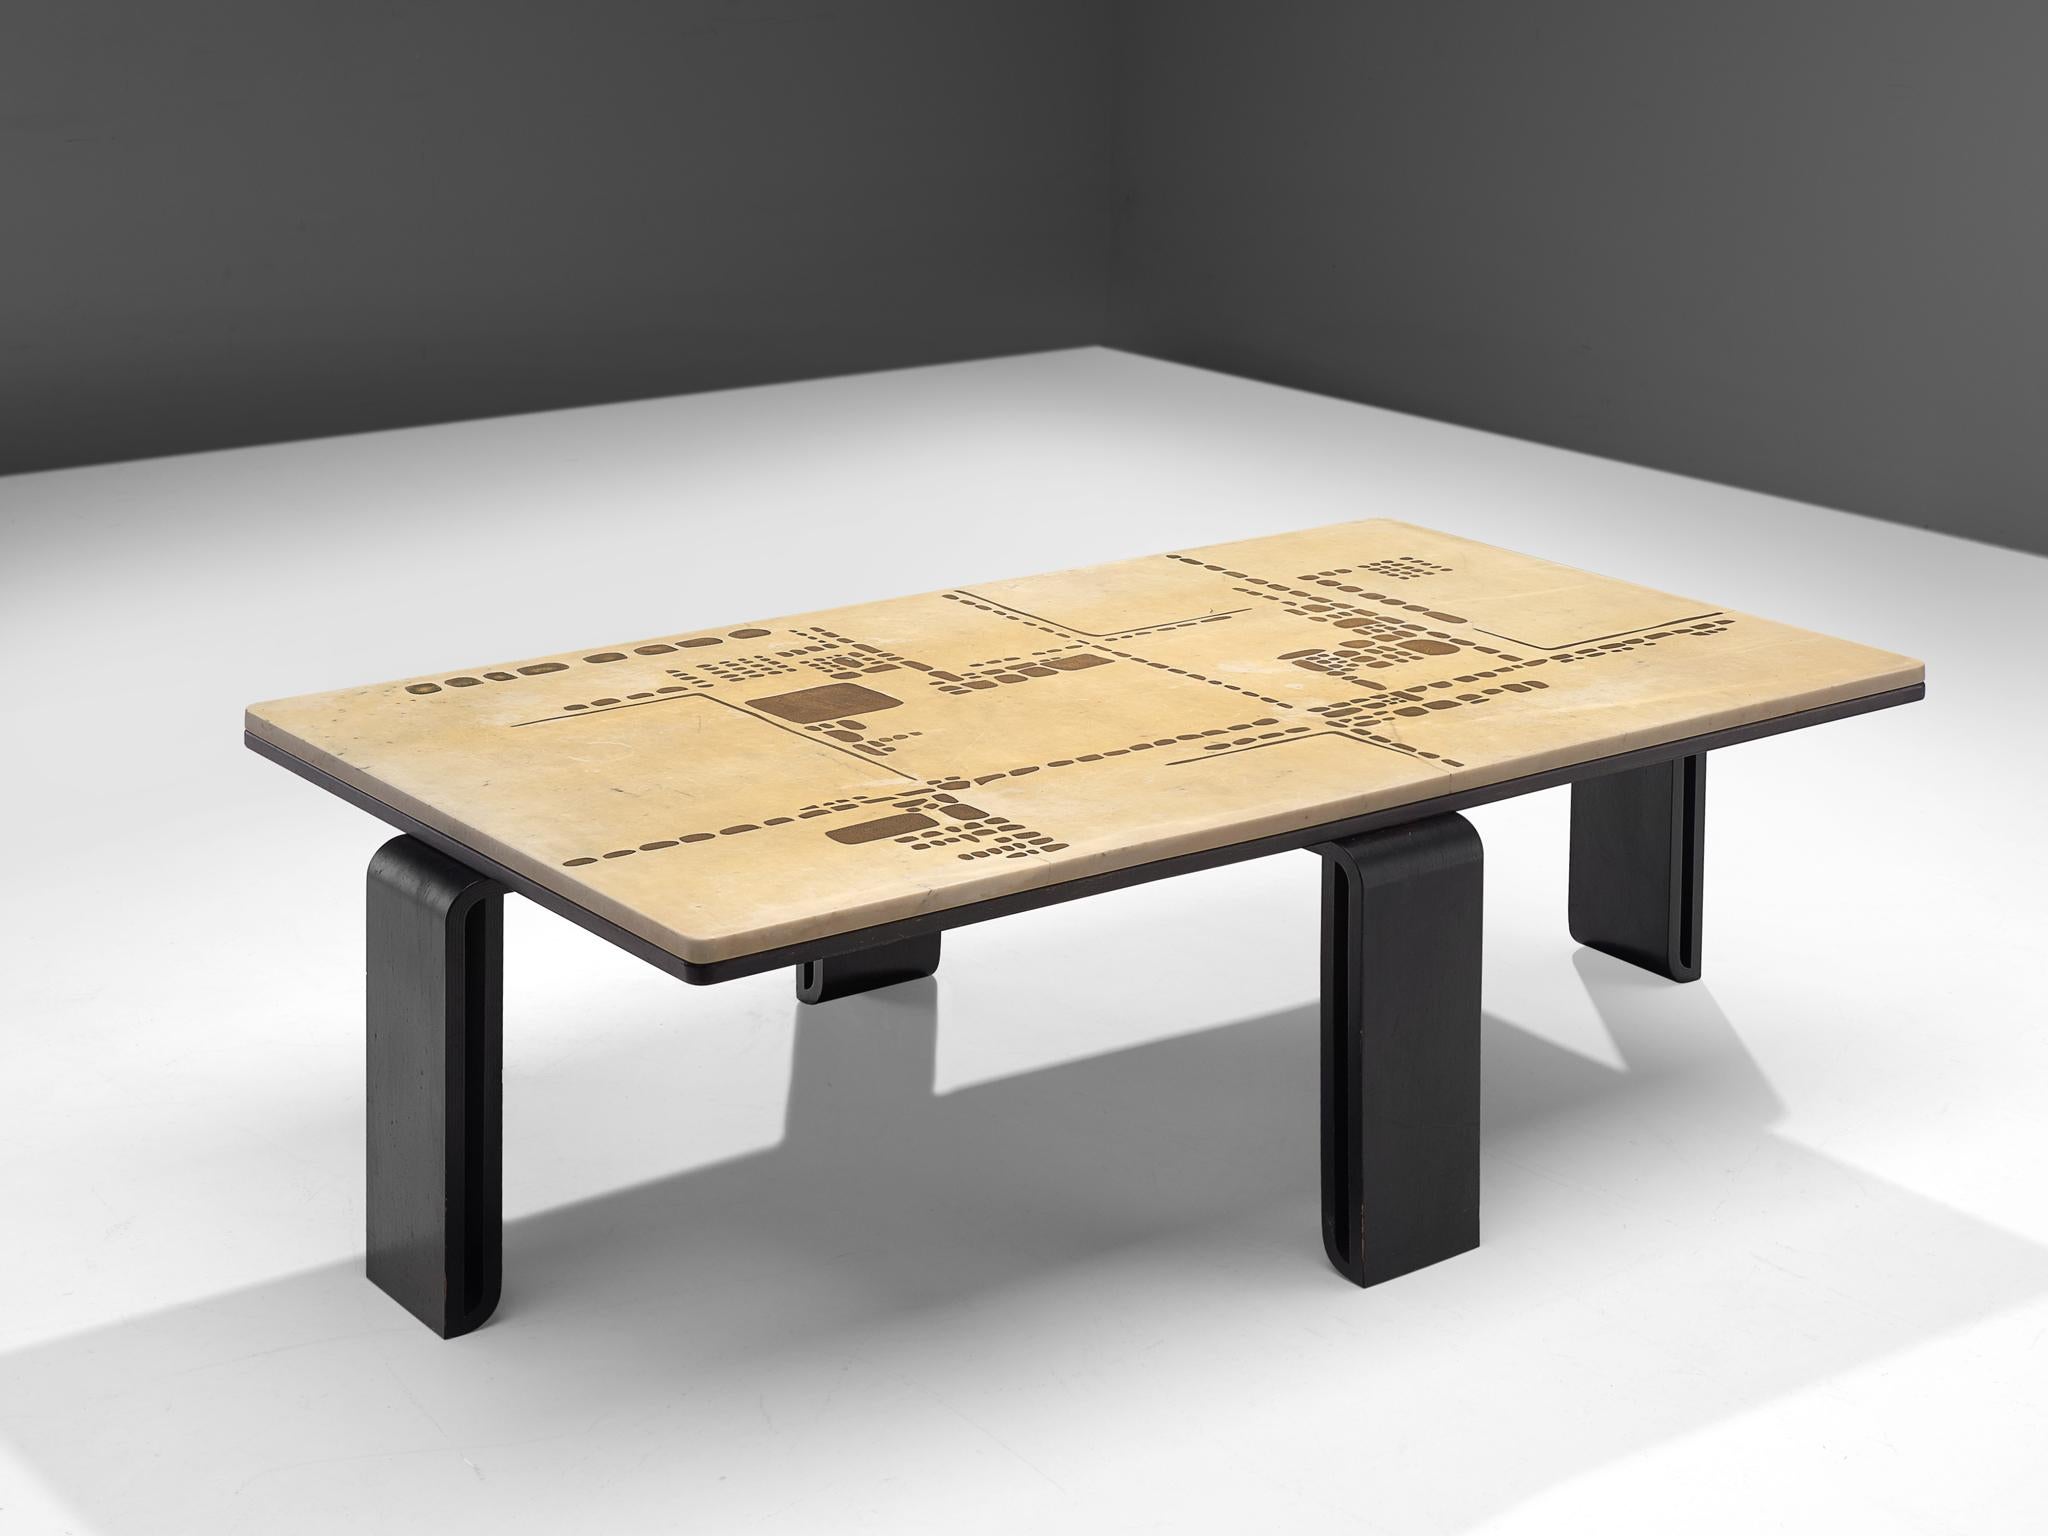 Coffee table, travertine, ebonized wood and concrete, the Netherlands, 1980s. 

Abstract design of marble table top, inlayed with concrete, creating a beautiful pattern. The frame is executed in blackened wood and features sculptural legs. Overall